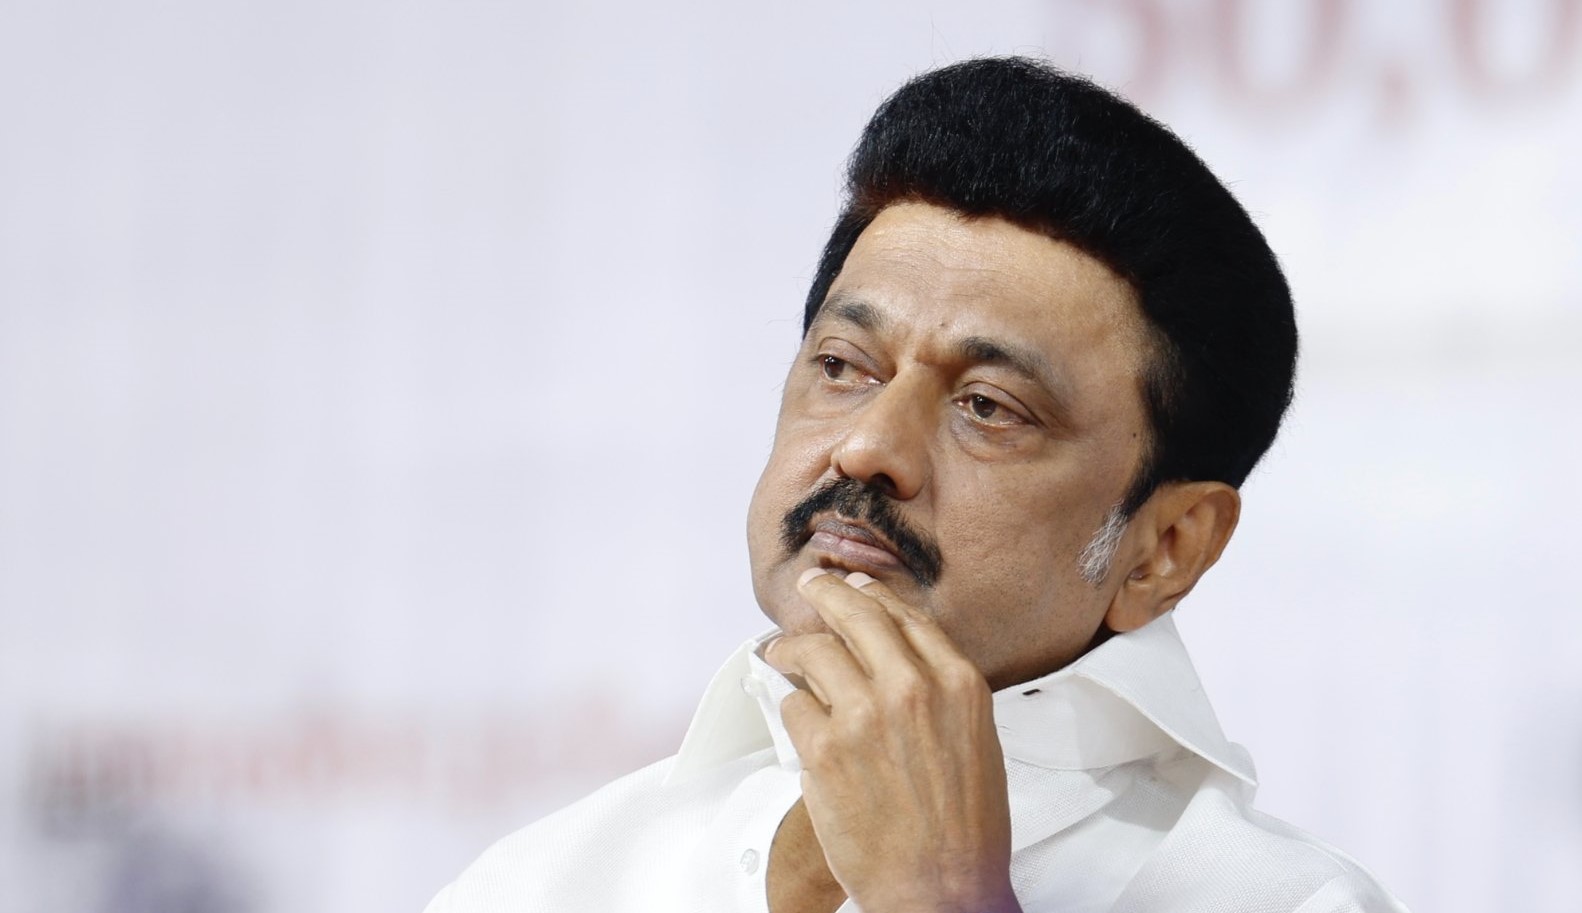 Tamil Nadu Chief Minister and DMK chief MK Stalin has written to Prime Minister Narendra Modi against the imposition of Hindi across India. (Supplied)